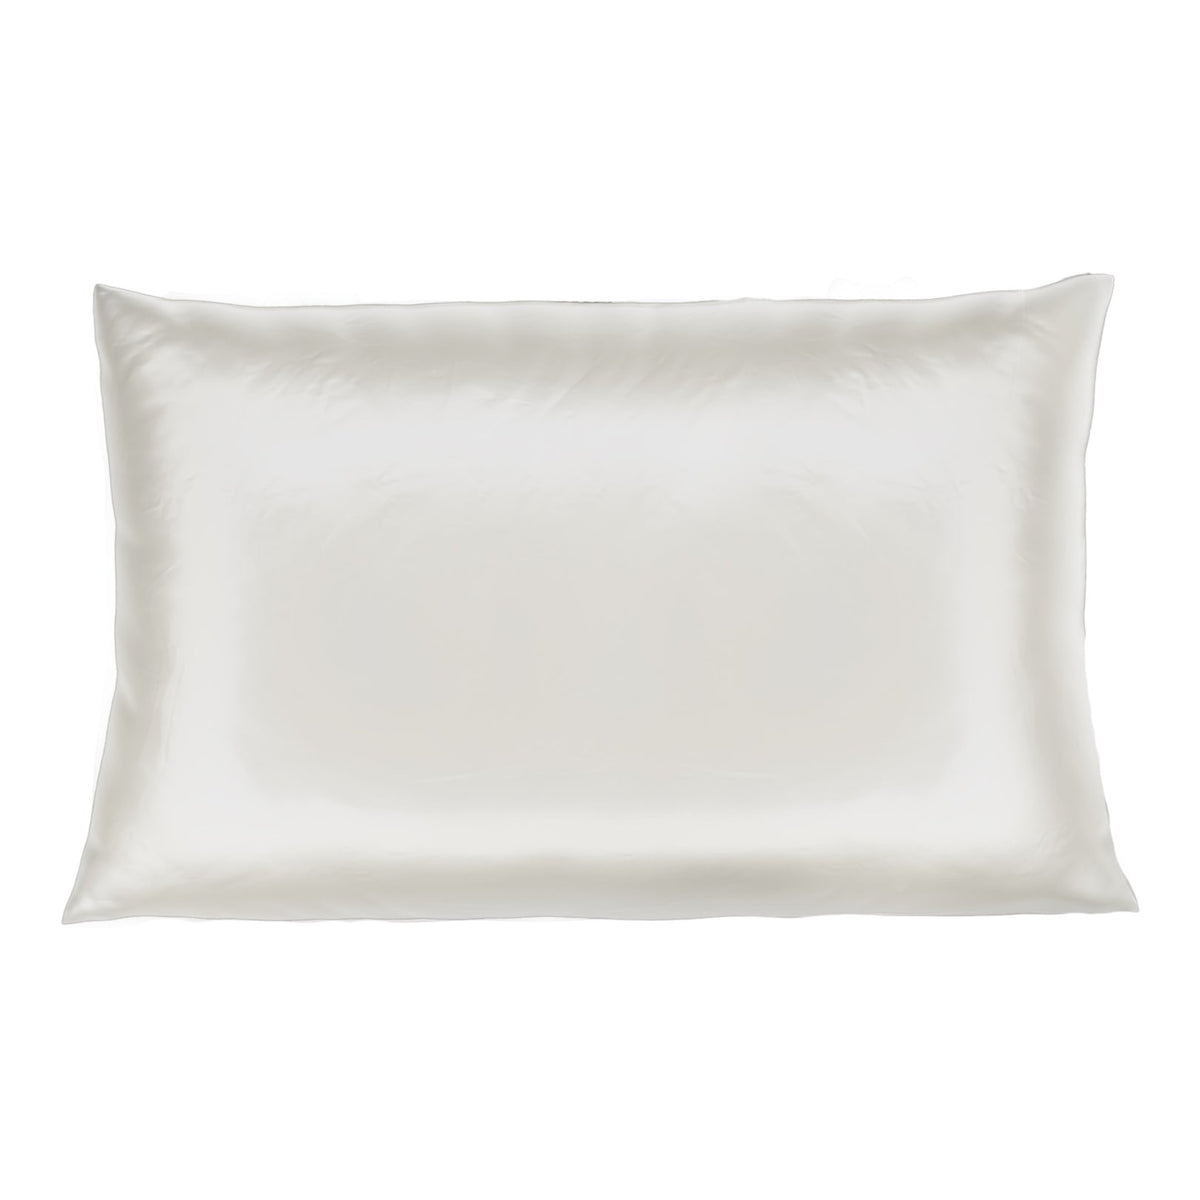 Mulberry Park Silks Deluxe 19 Momme Pure Silk Pillowcase in Ivory Color